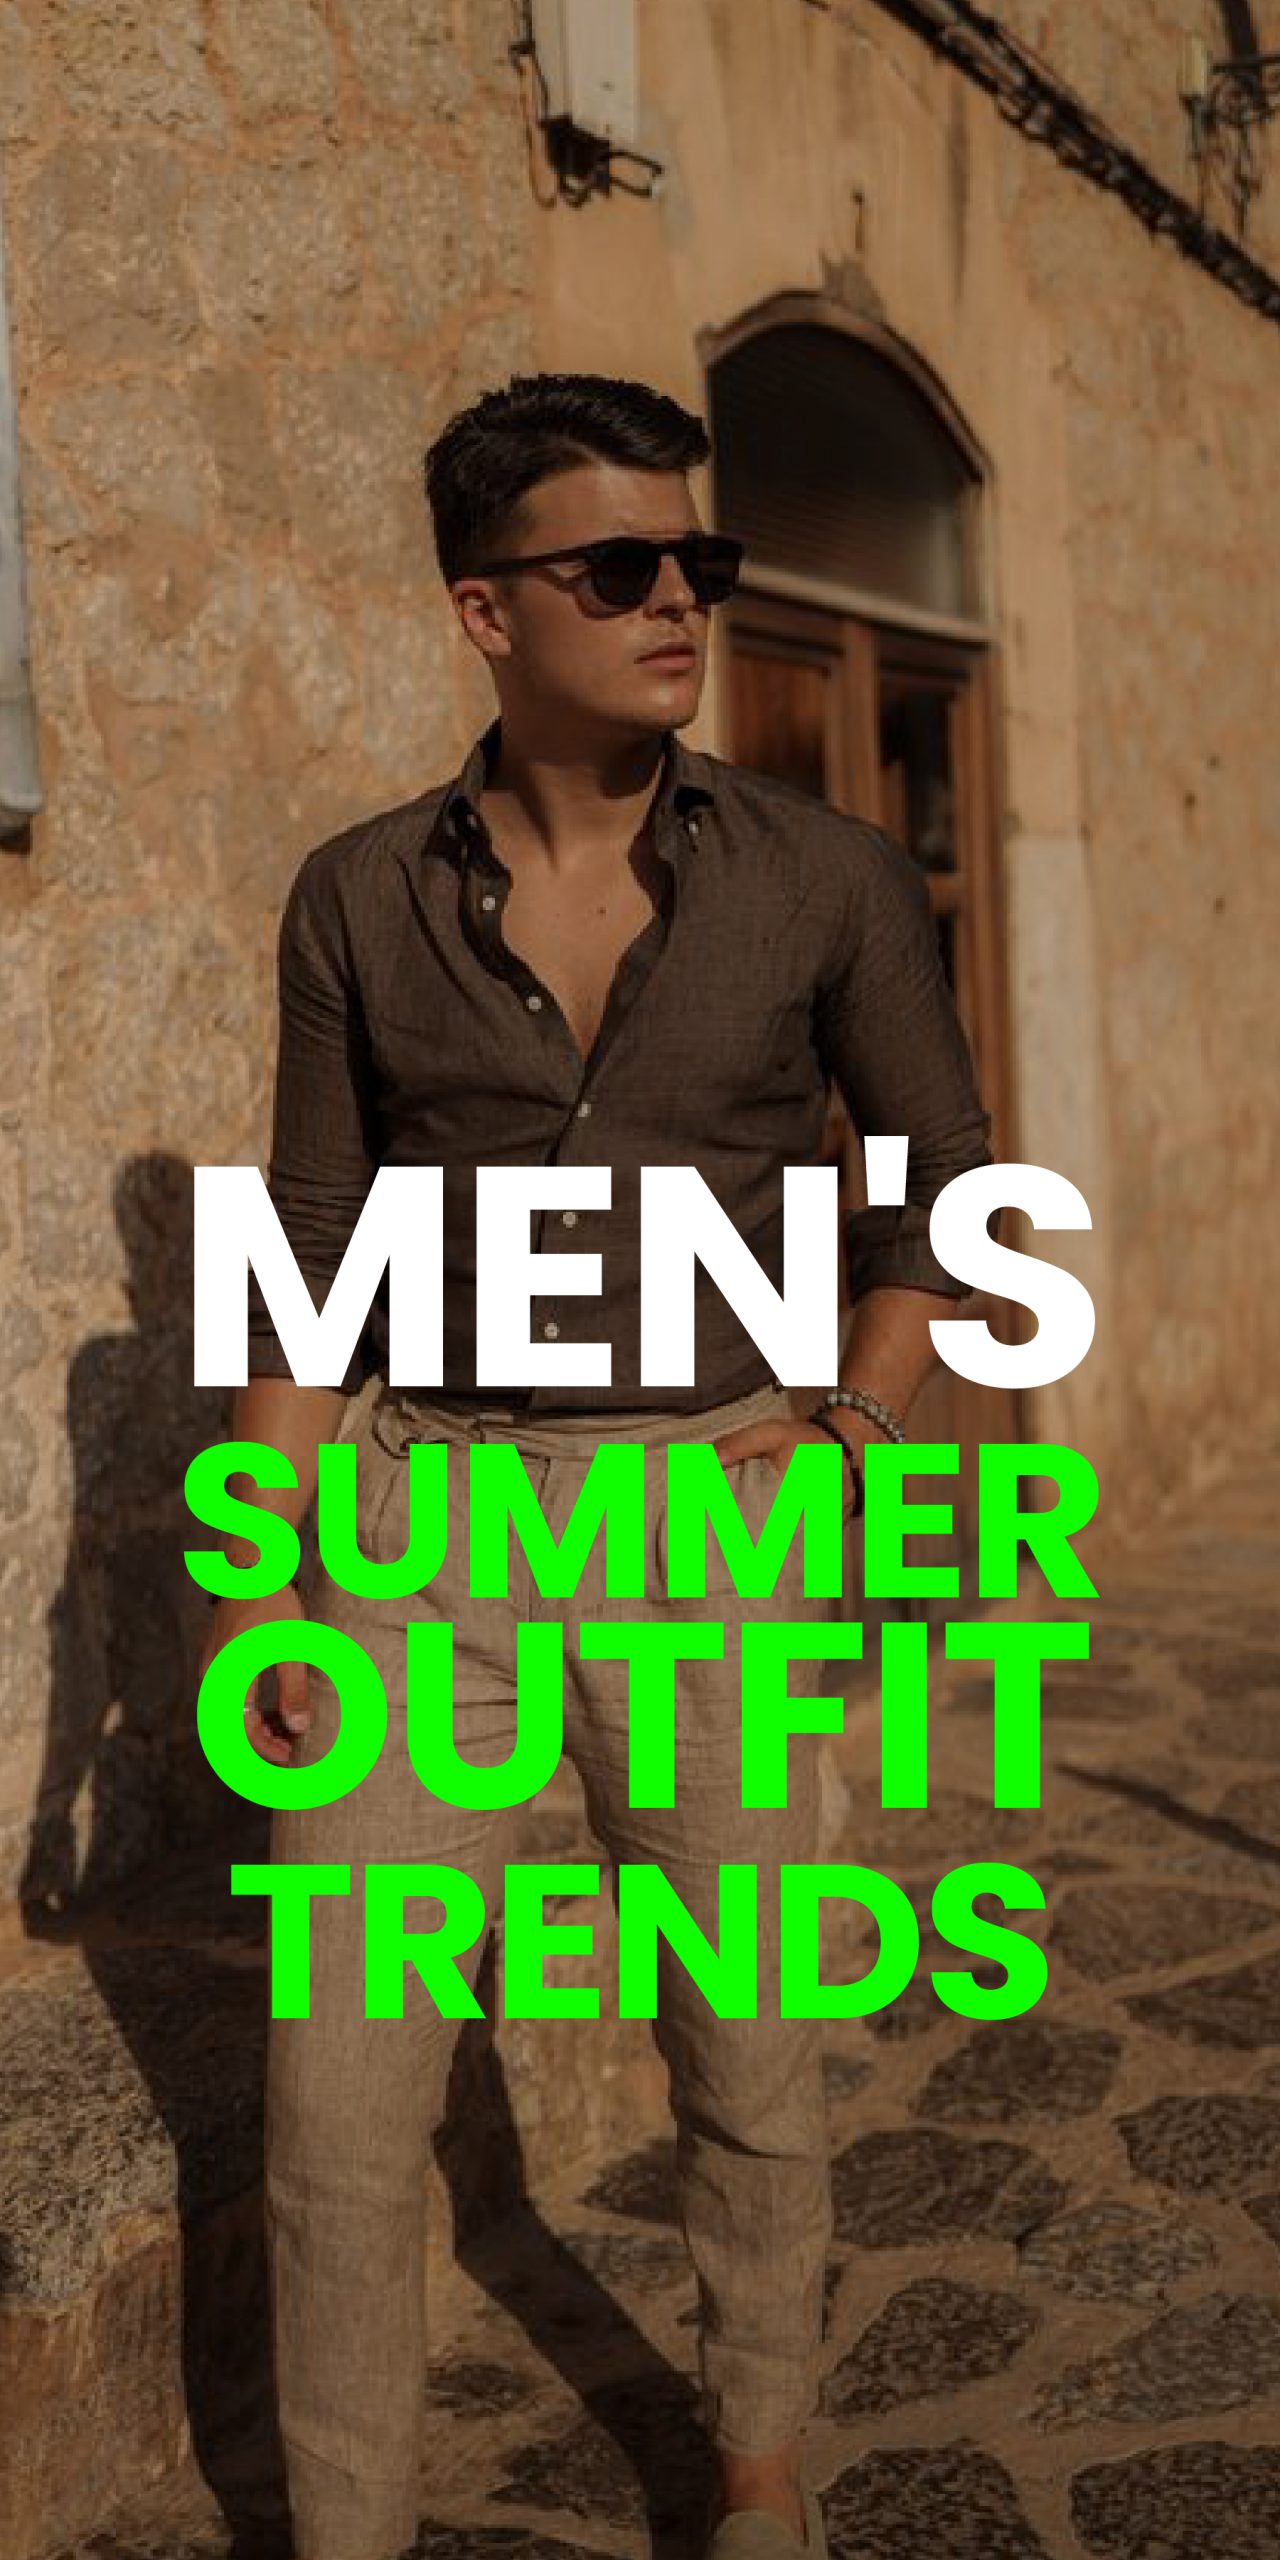 MEN’S SUMMER OUTFIT TRENDS